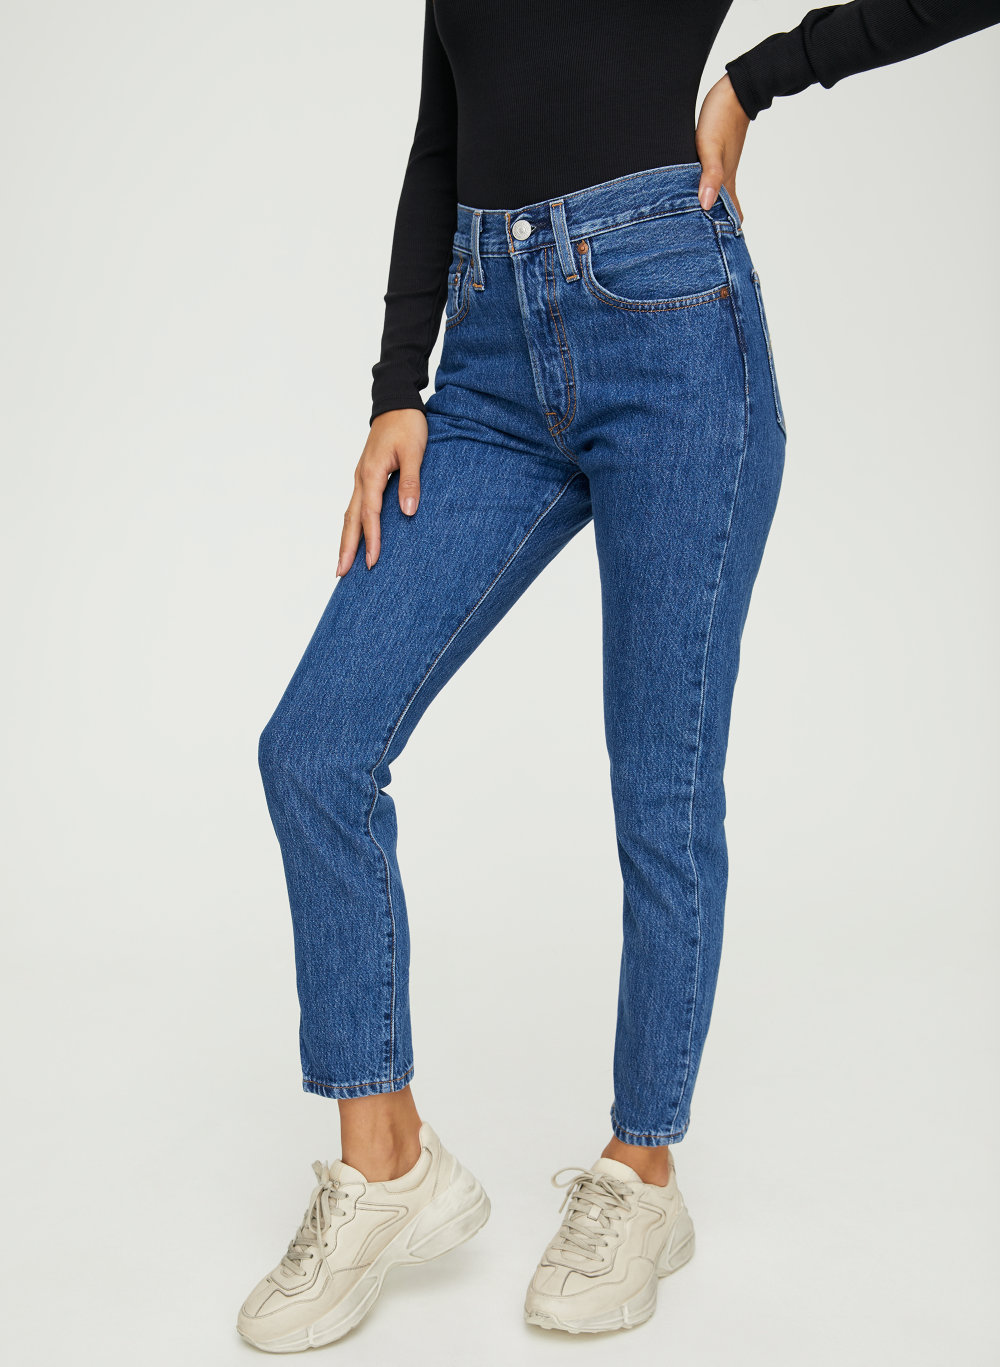 levi 501 jeans canada